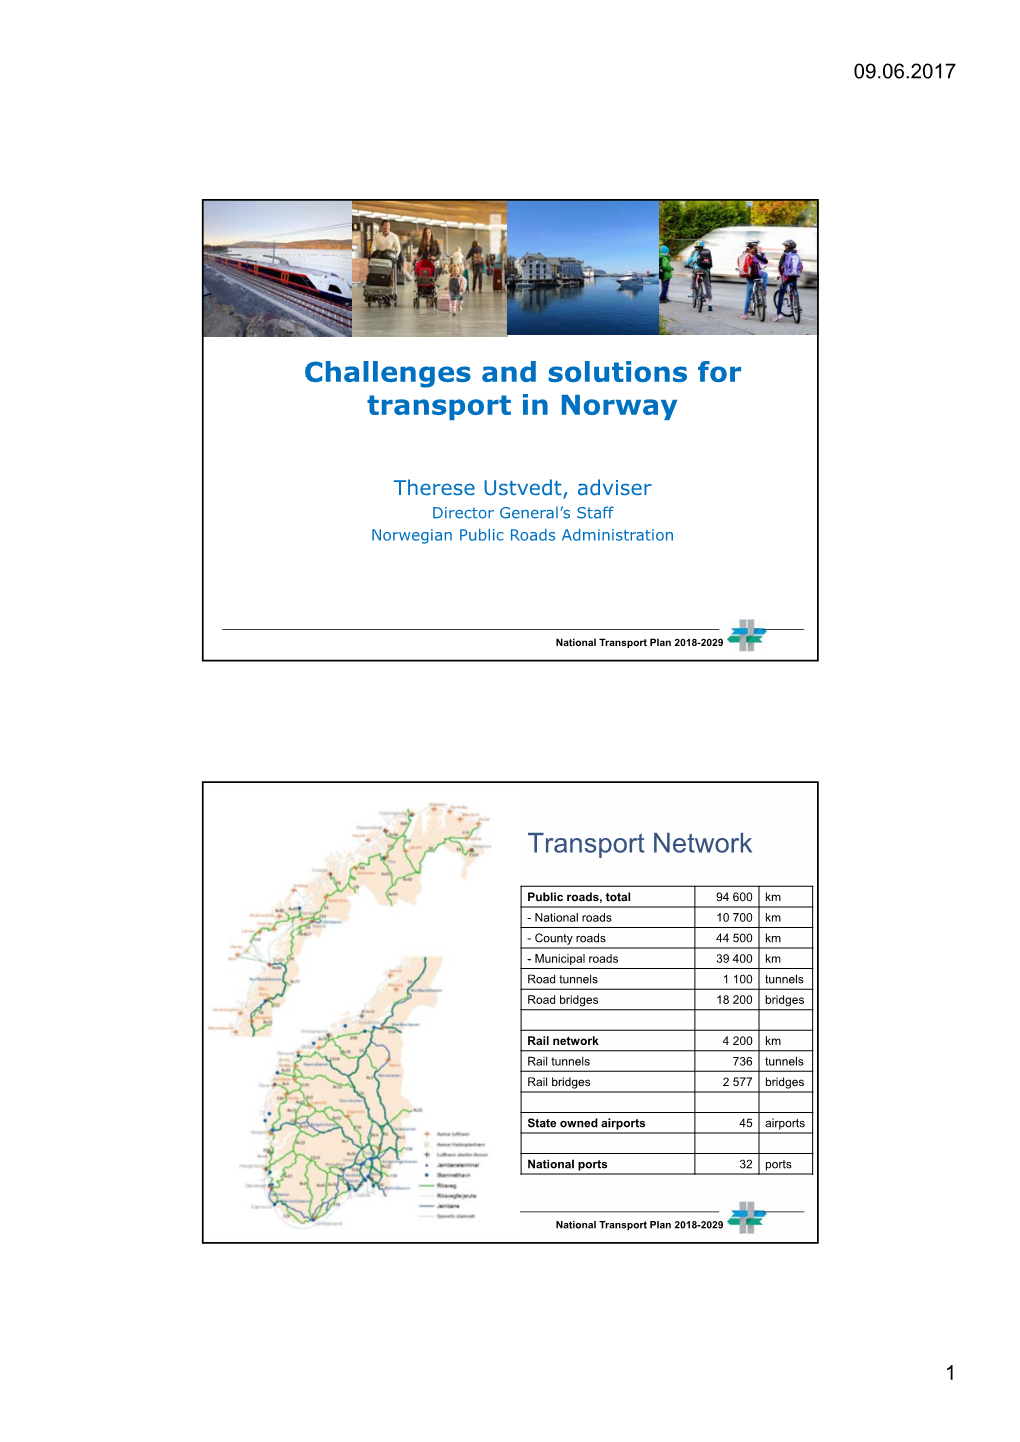 Challenges and Solutions for Transport in Norway